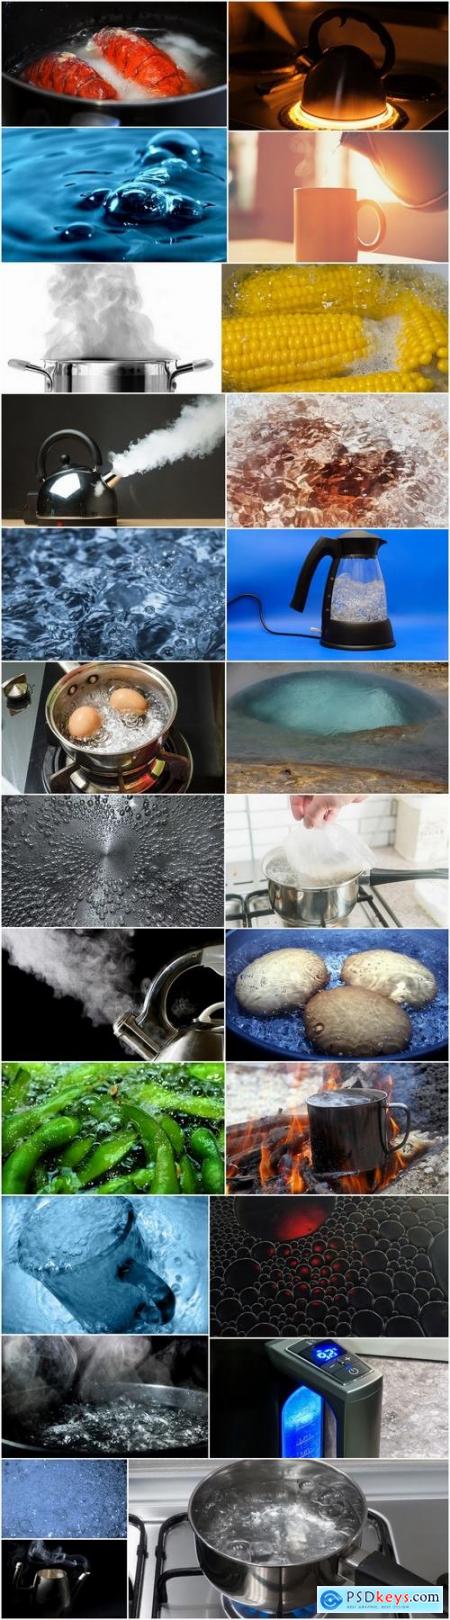 Boiling water steam cooking boiled food products 25 HQ Jpeg